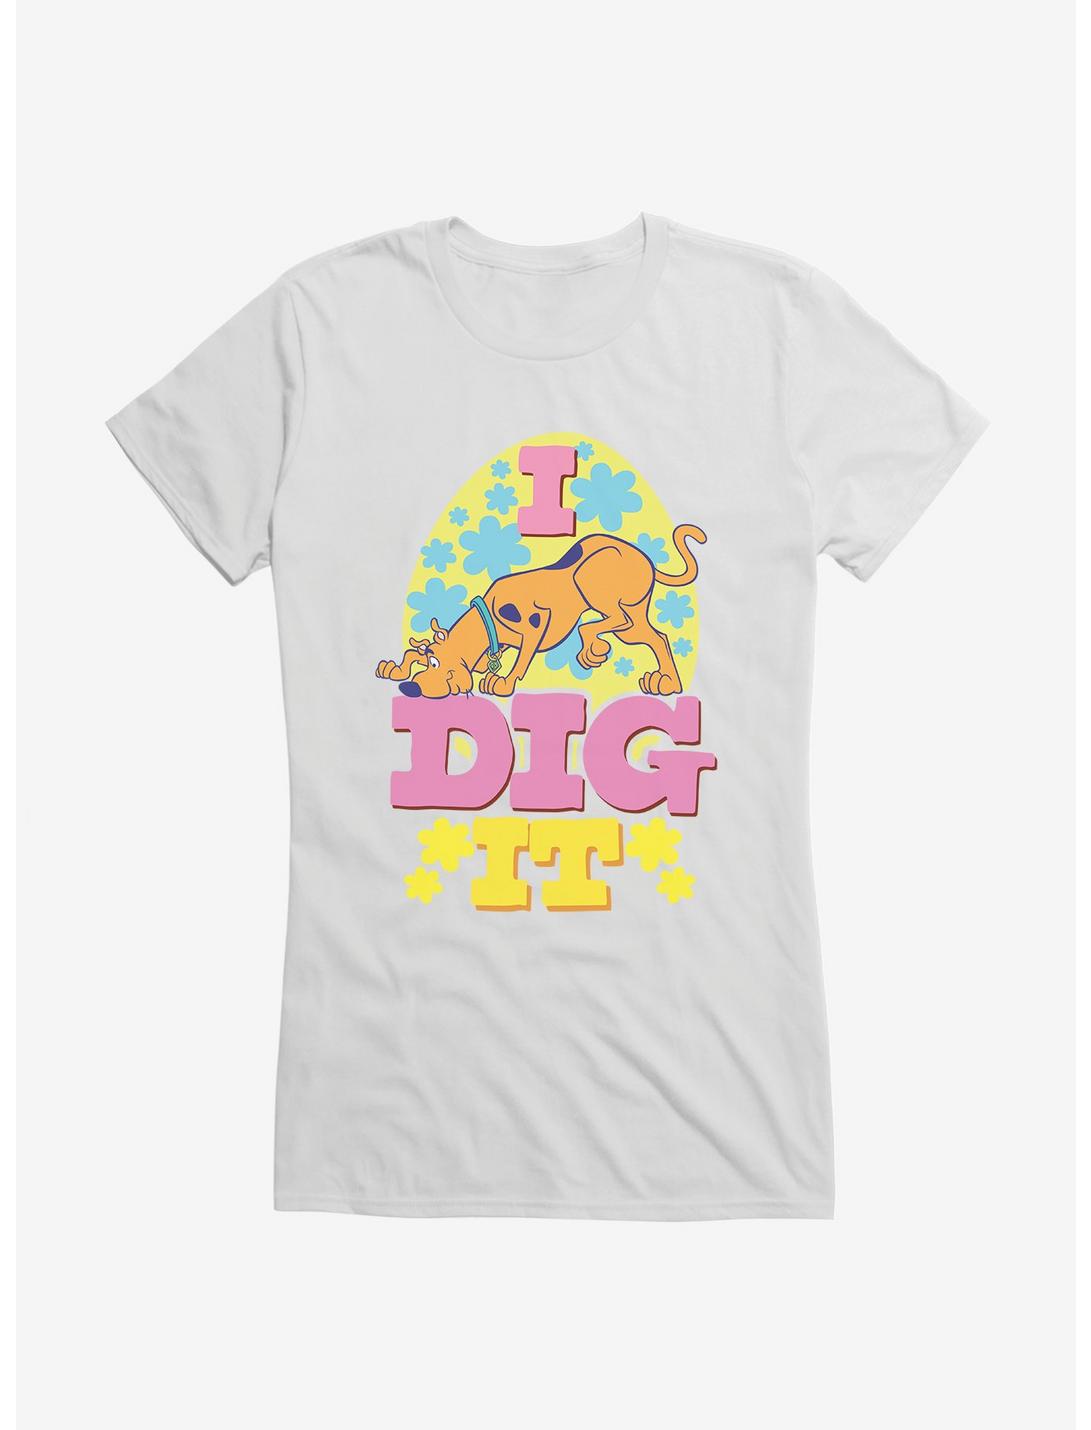 Scooby-Doo I Dig It Flowers Girls T-Shirt, WHITE, hi-res